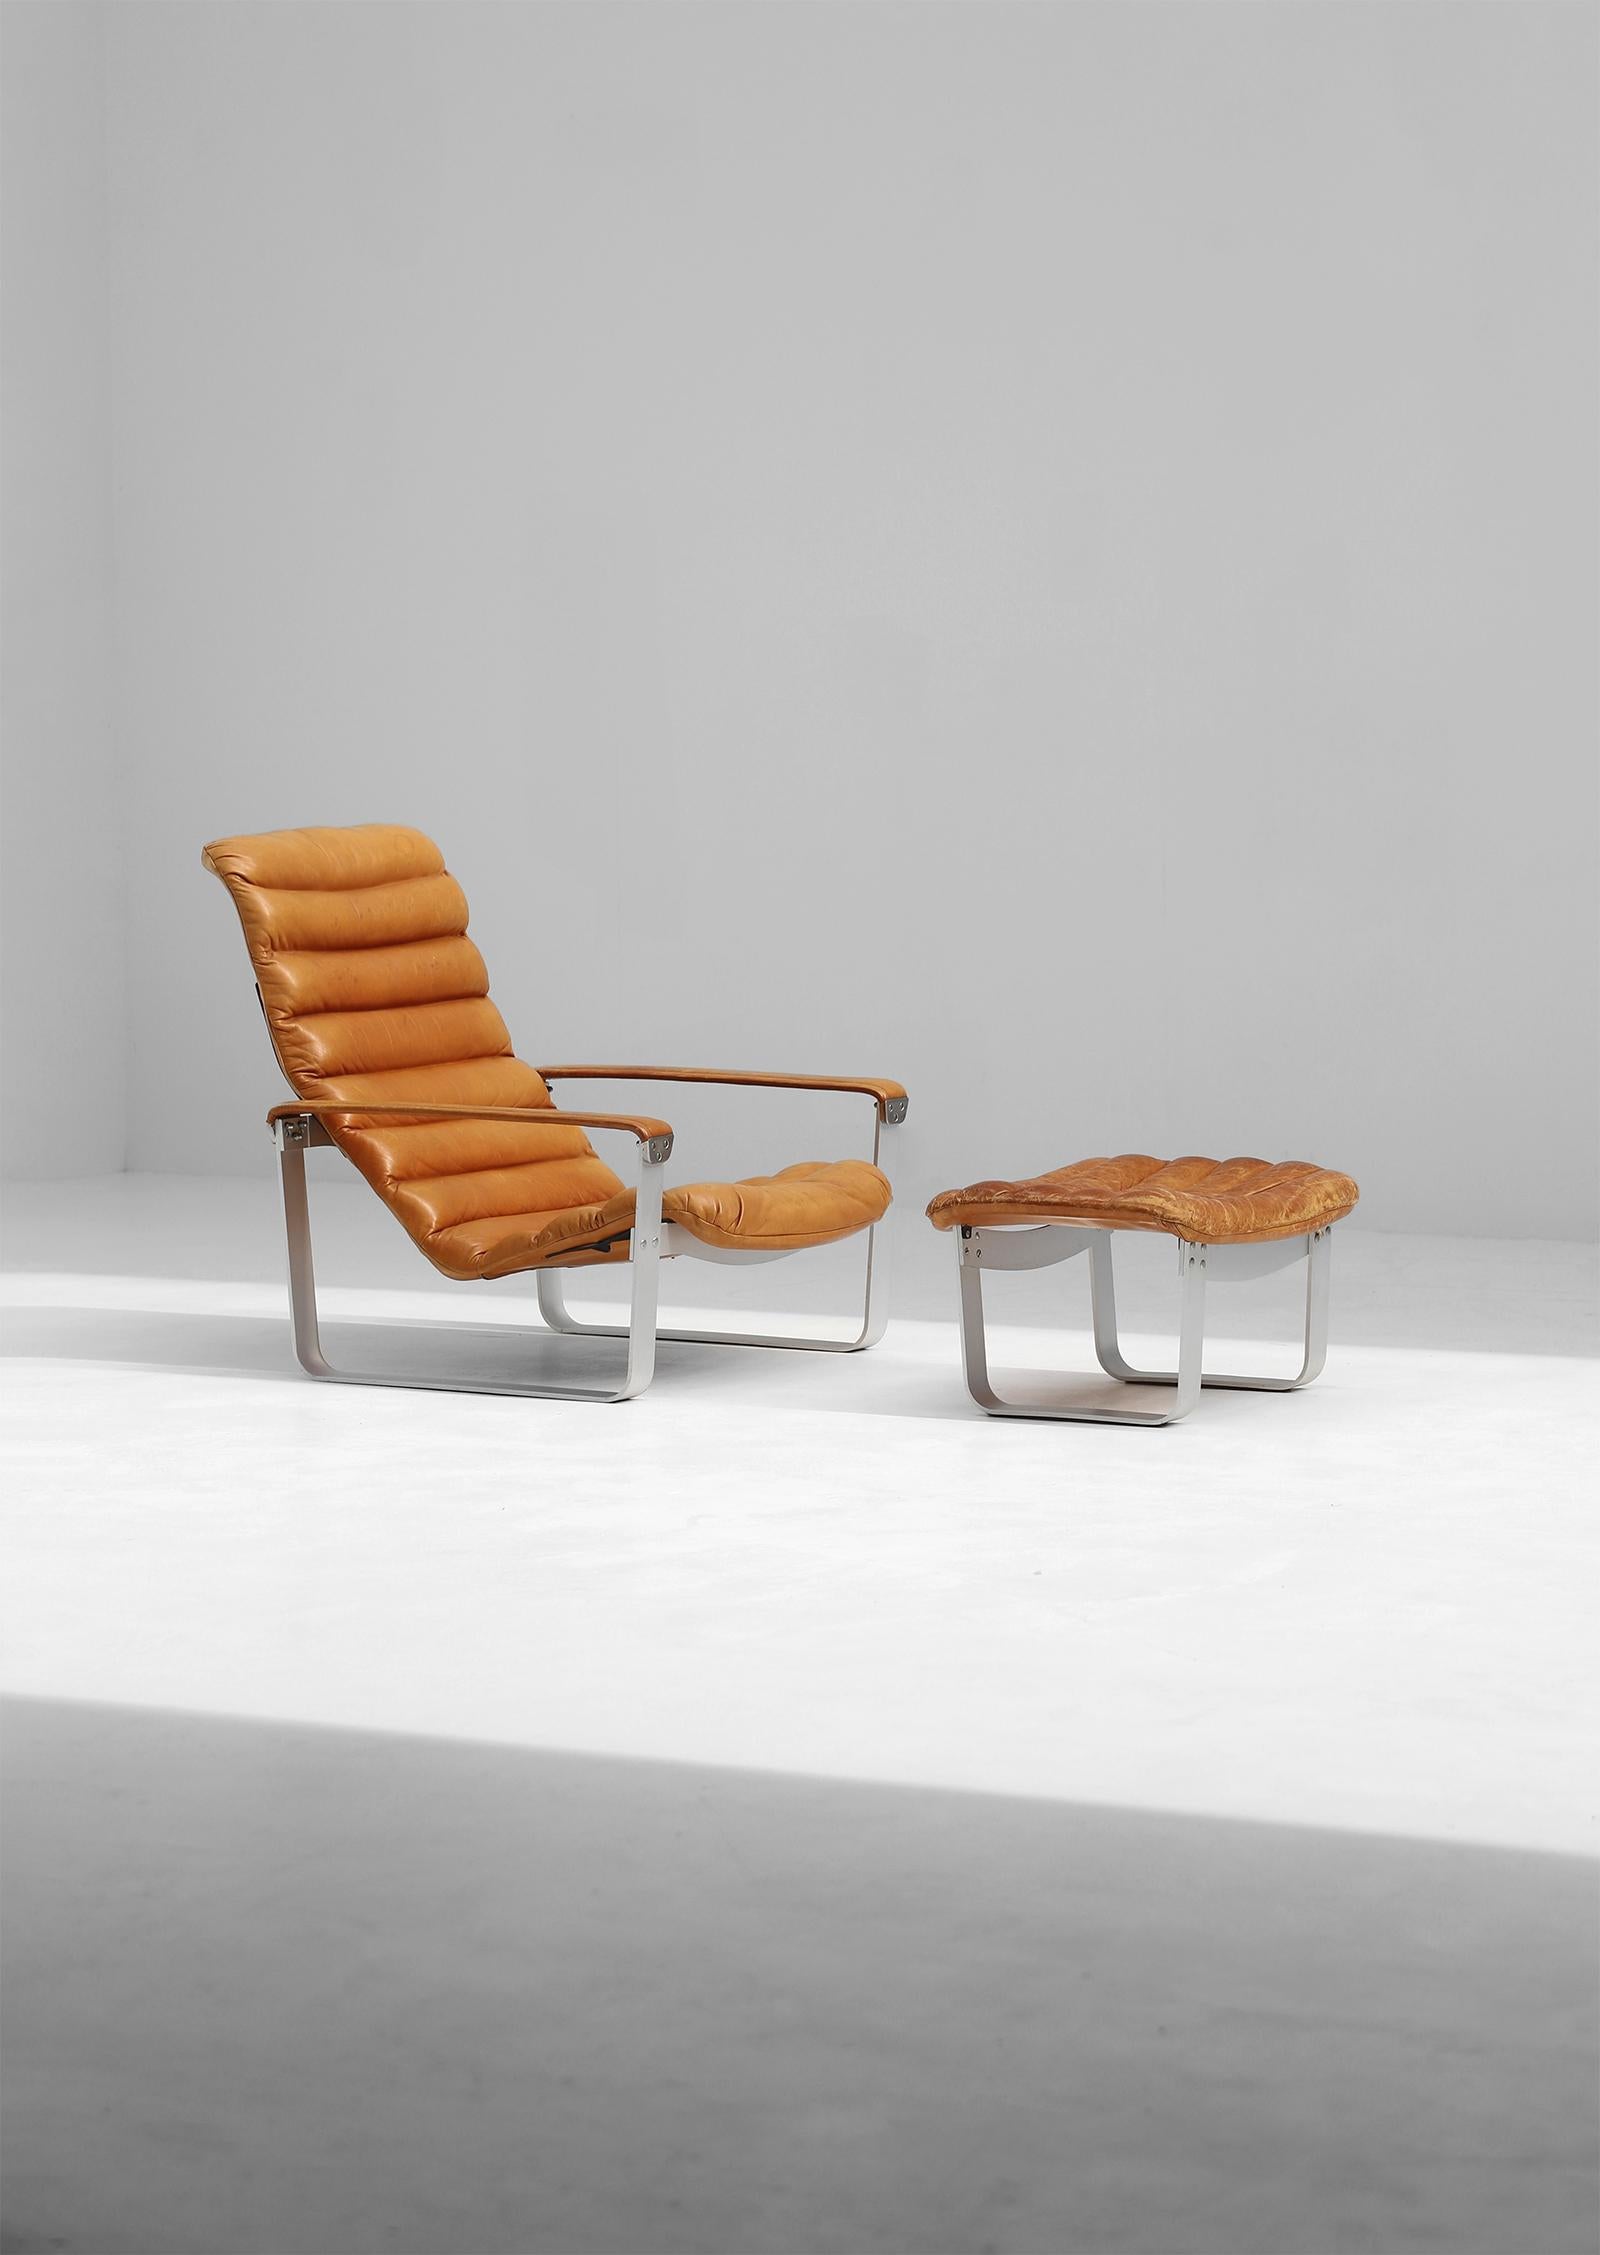 Lounge chair with Ottoman designed by Ilmari Lappalainen For Asko 1960s. Both items have an aluminum base and are upholstered in a cognac coloured leather, which has gained a beautifell patina over the years. The seating is adjustable in three